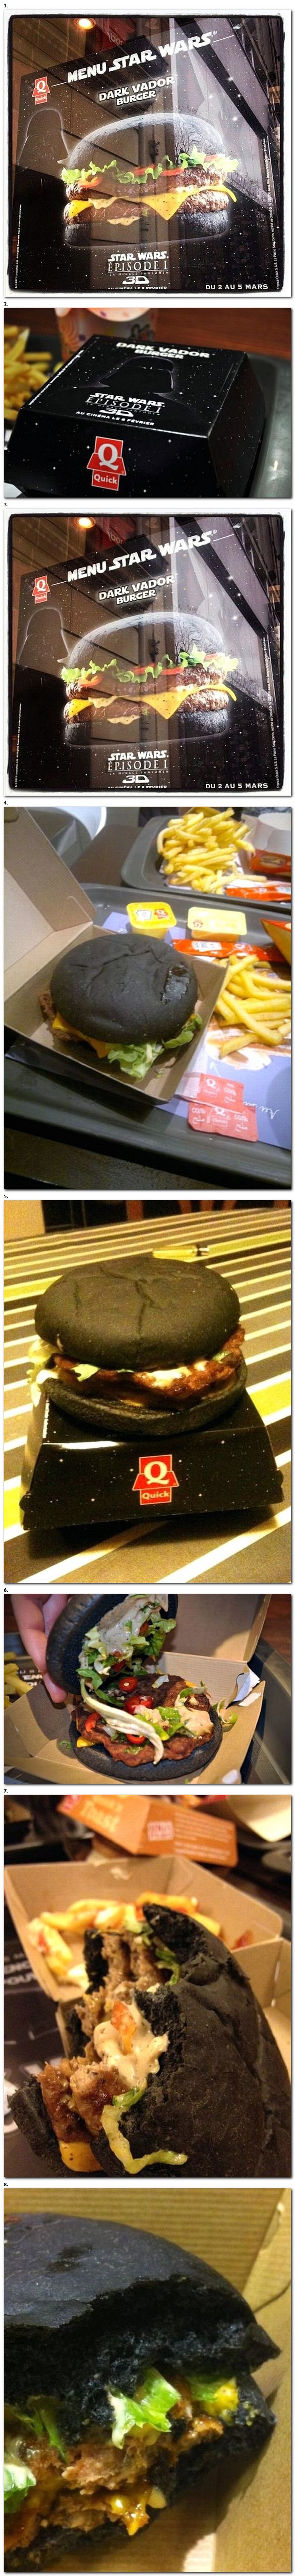 Dark Vader Burger is only available in Europe.